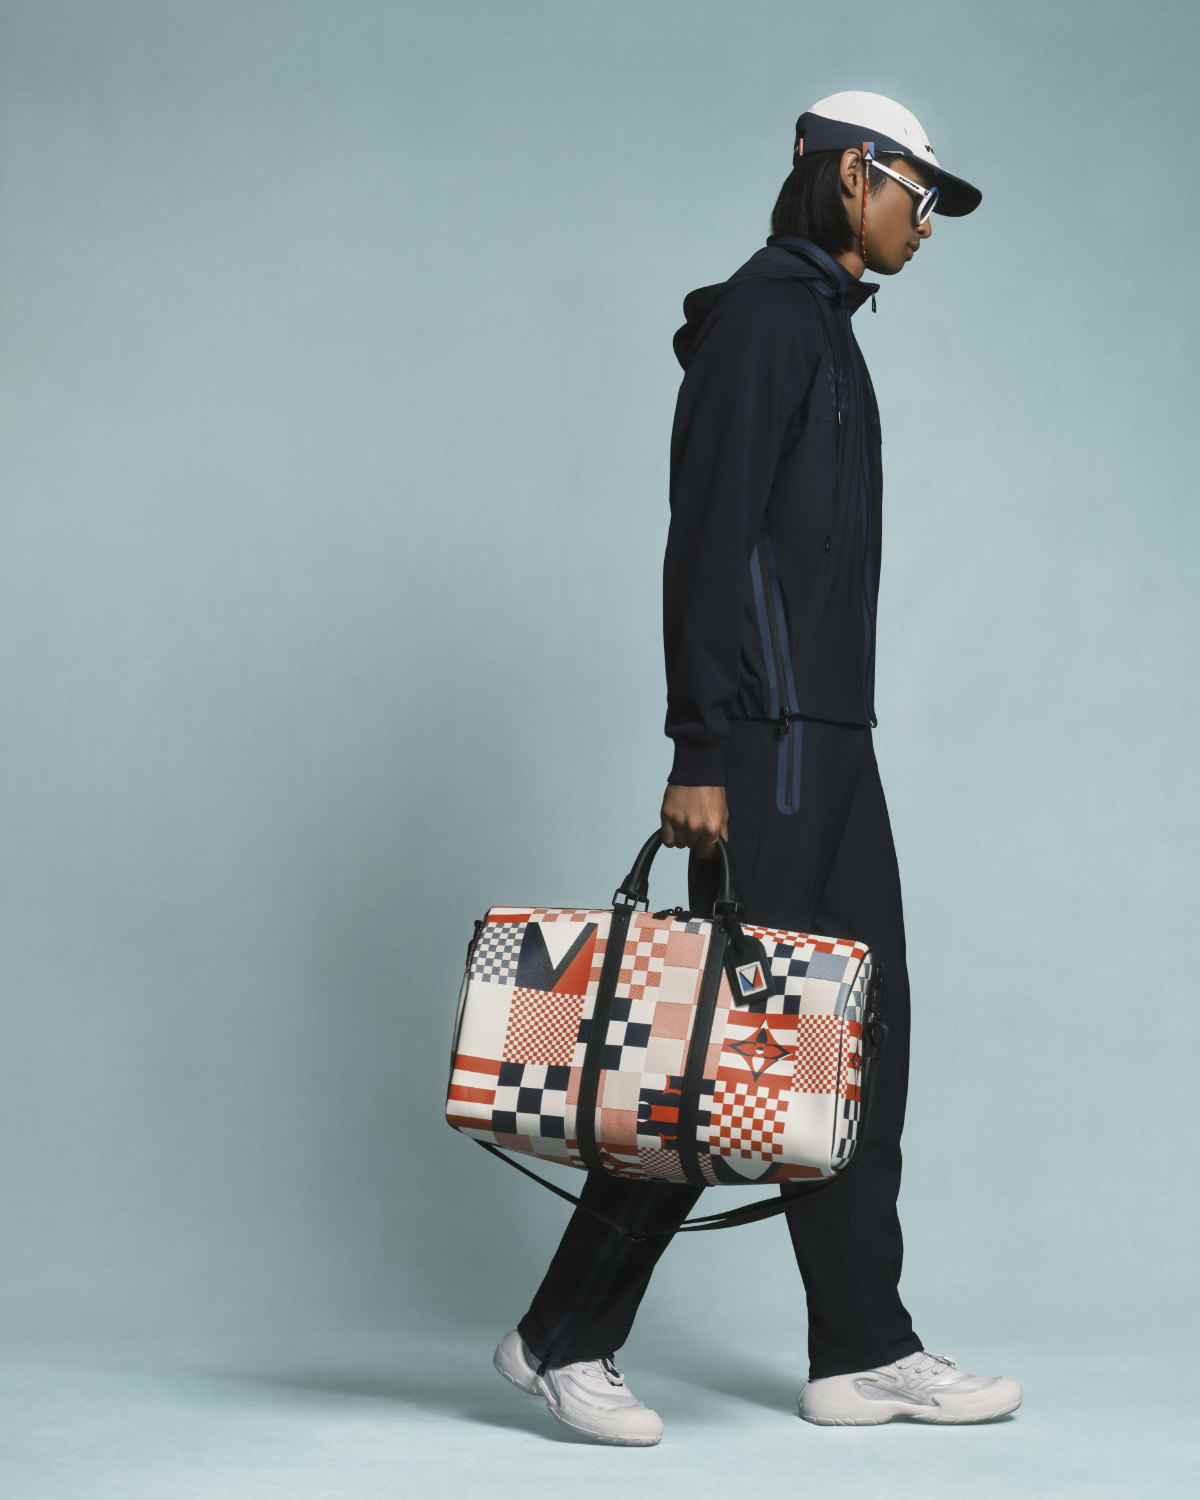 Louis Vuitton Celebrates The LV 37th America's Cup Barcelona With A Special Capsule Collection